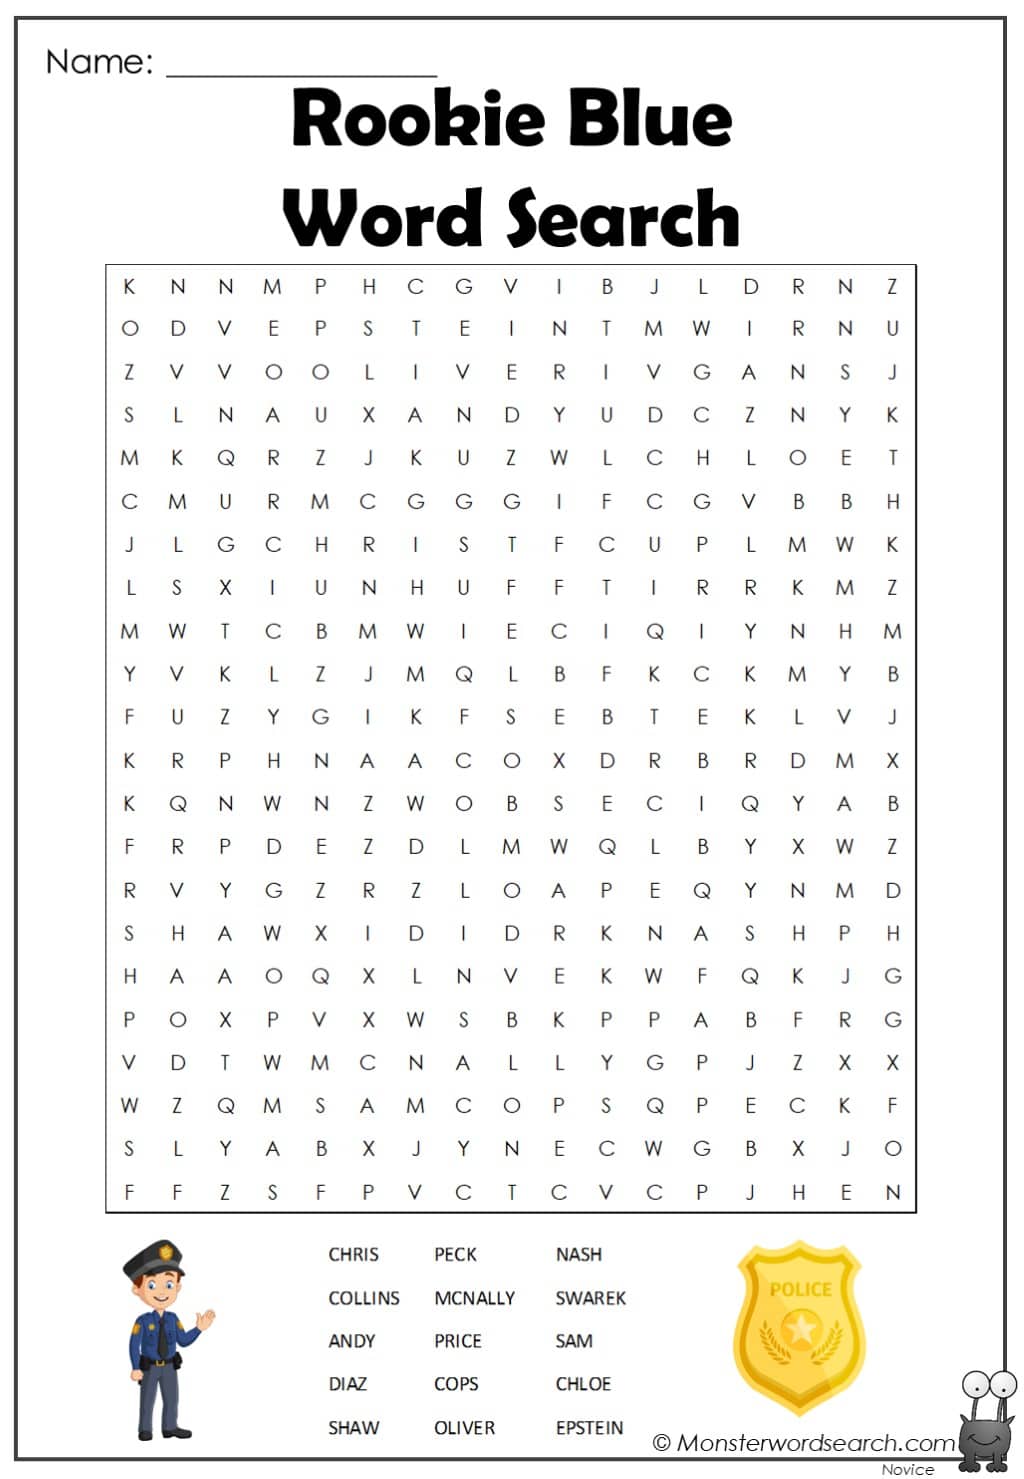 Rookie Blue Word Search